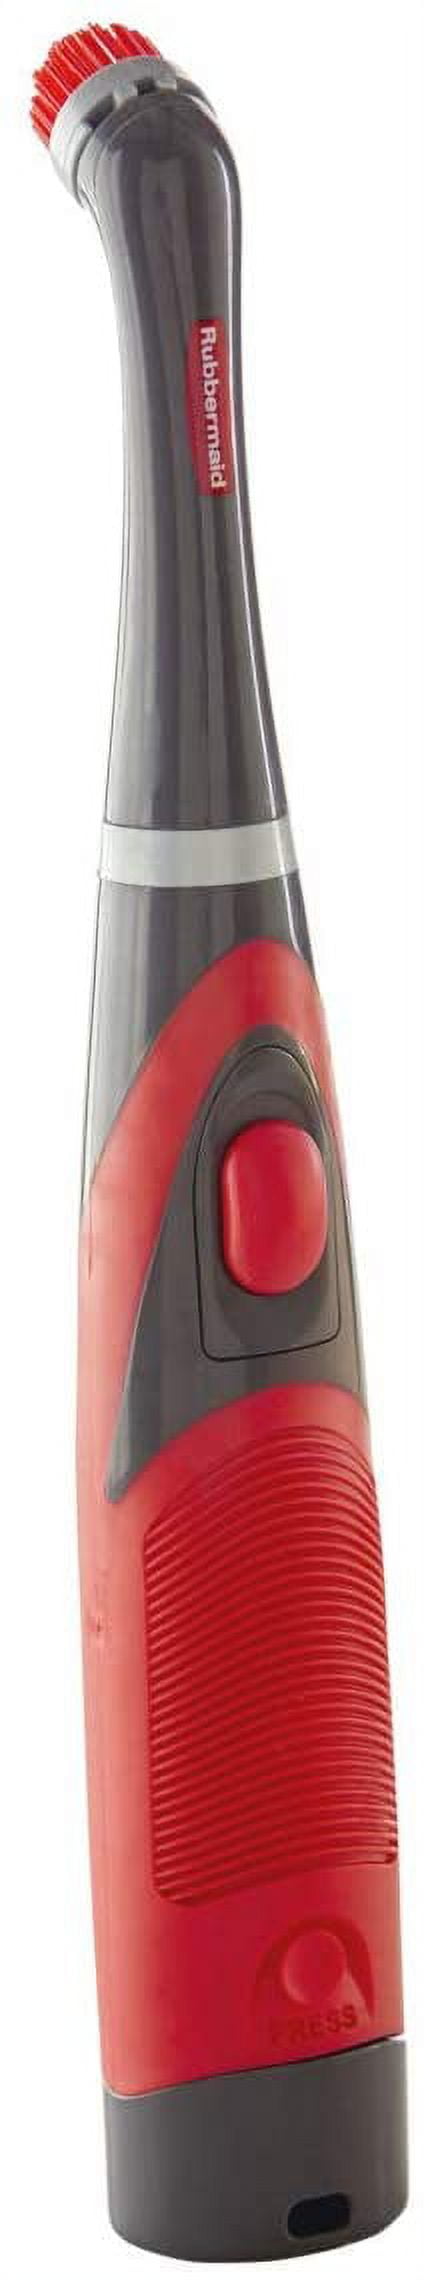 Rubbermaid Reveal Cordless Battery Power Scrubber, Red, Multi-Purpose –  Joanna Home